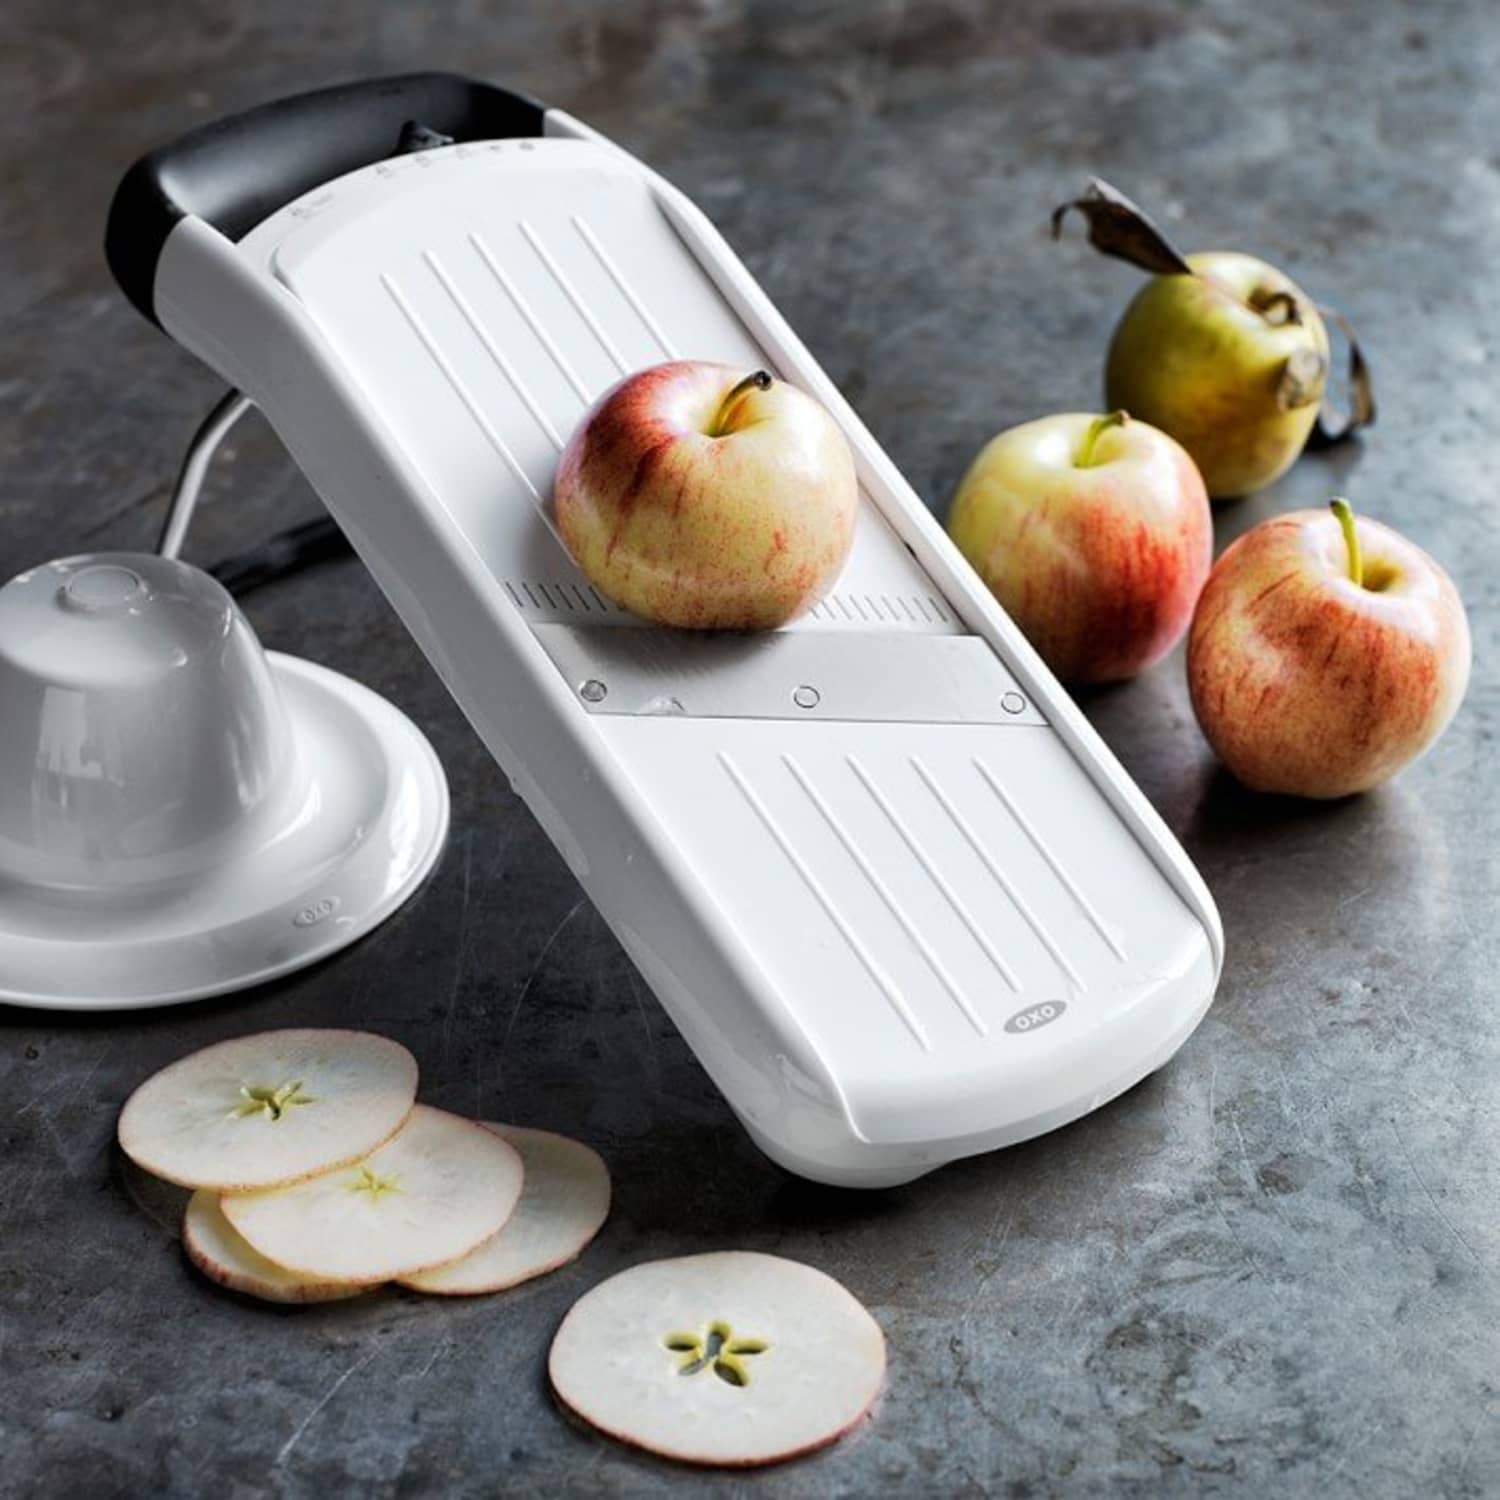 Mandoline tips for smart and safe buying and using - The Washington Post